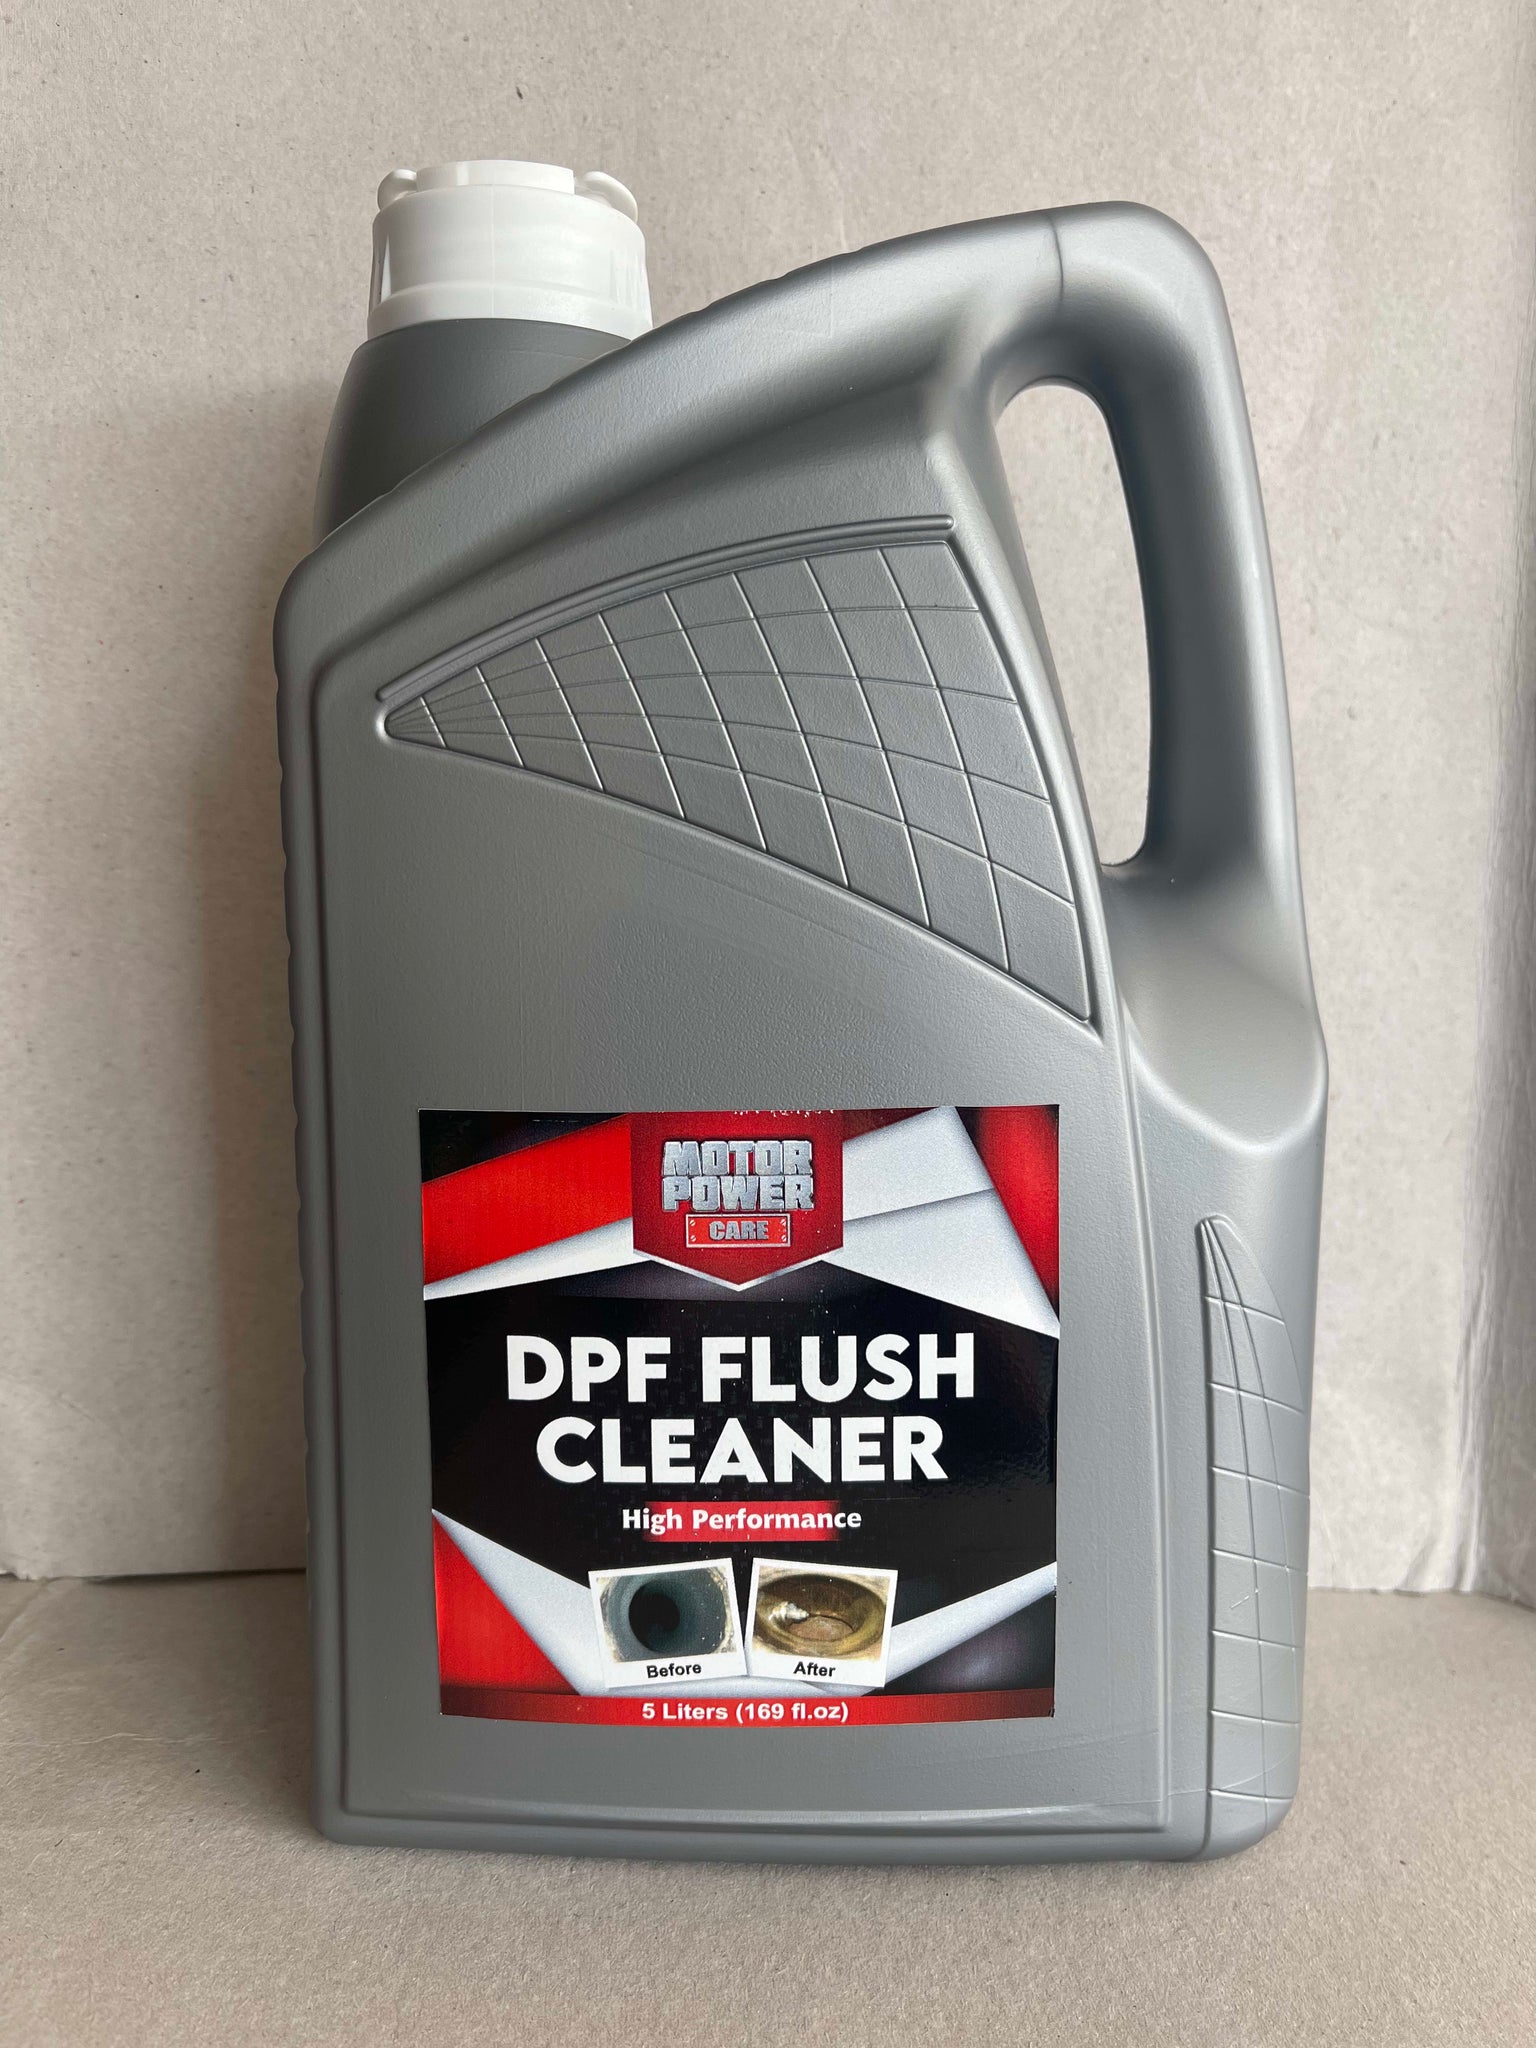 5L DPF cleaner diesel particulate filter DPF flush soot particle filter